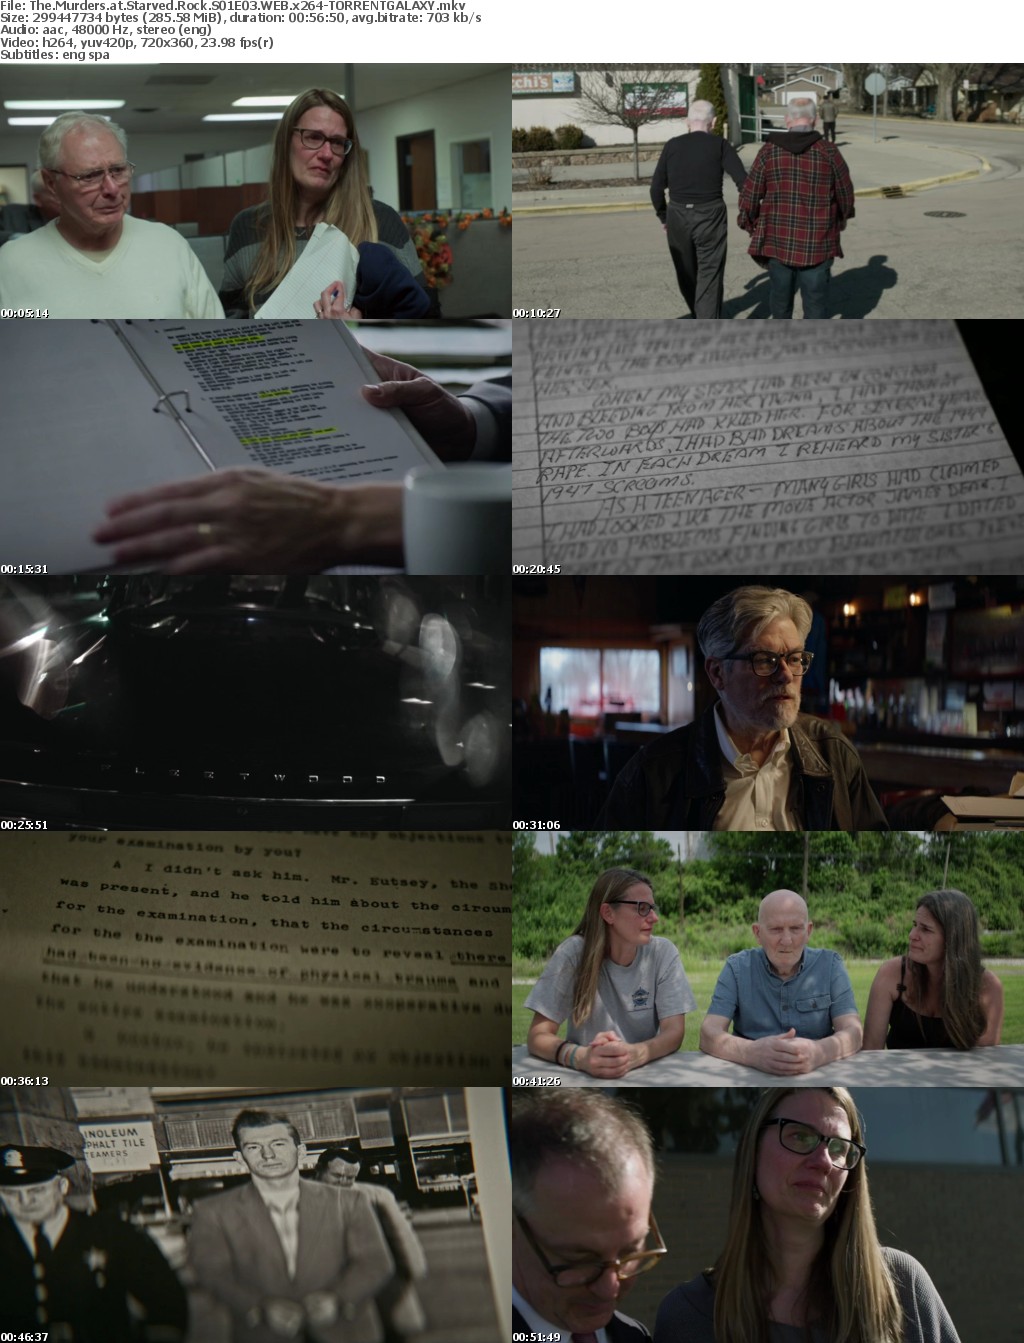 The Murders at Starved Rock S01E03 WEB x264-GALAXY